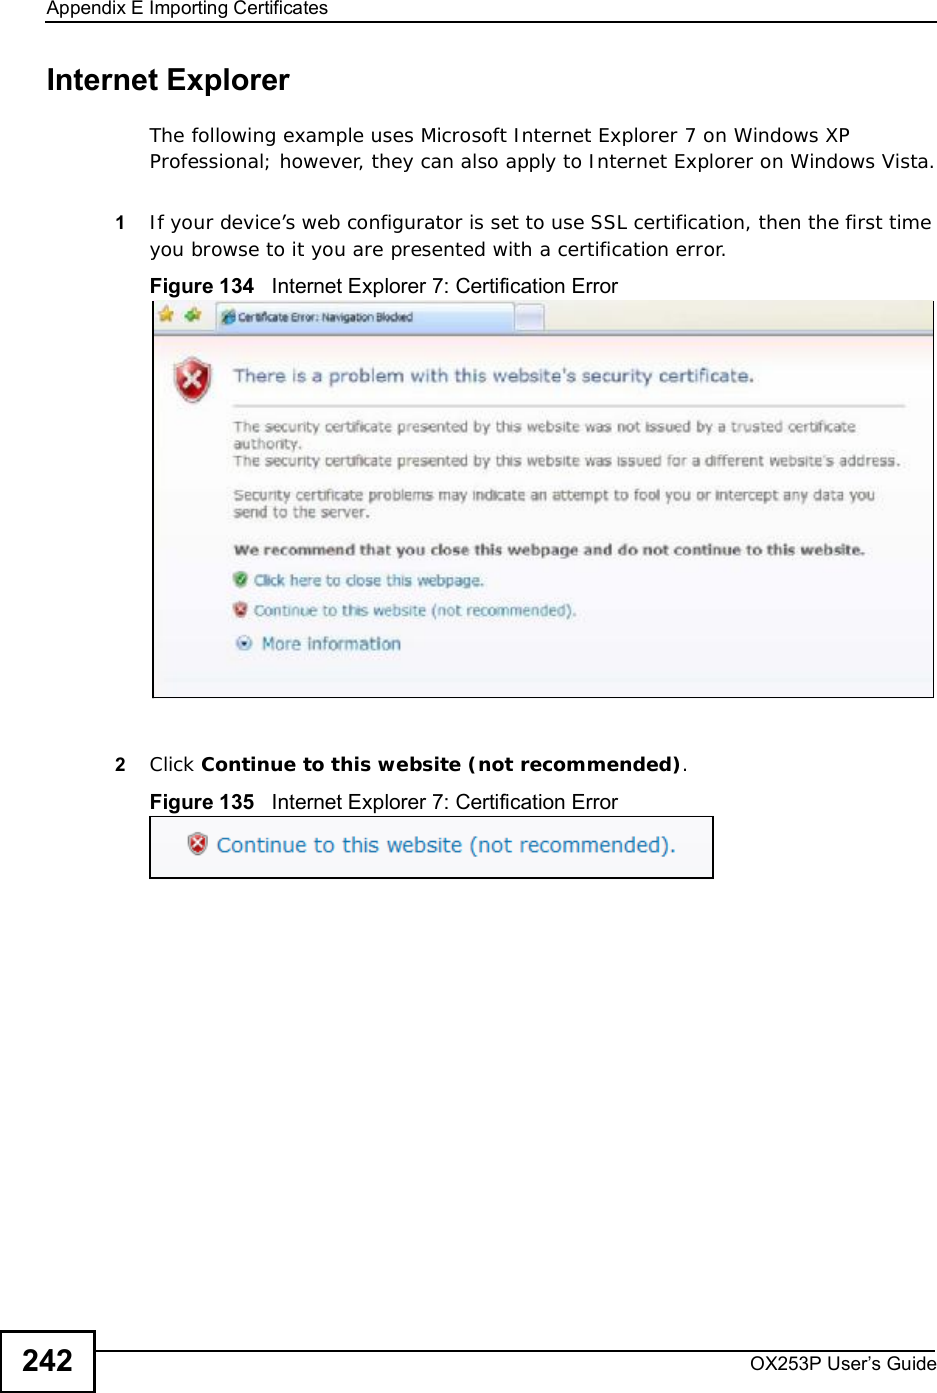 Appendix EImporting CertificatesOX253P User’s Guide242Internet ExplorerThe following example uses Microsoft Internet Explorer 7 on Windows XP Professional; however, they can also apply to Internet Explorer on Windows Vista.1If your device’s web configurator is set to use SSL certification, then the first time you browse to it you are presented with a certification error.Figure 134   Internet Explorer 7: Certification Error2Click Continue to this website (not recommended).Figure 135   Internet Explorer 7: Certification Error